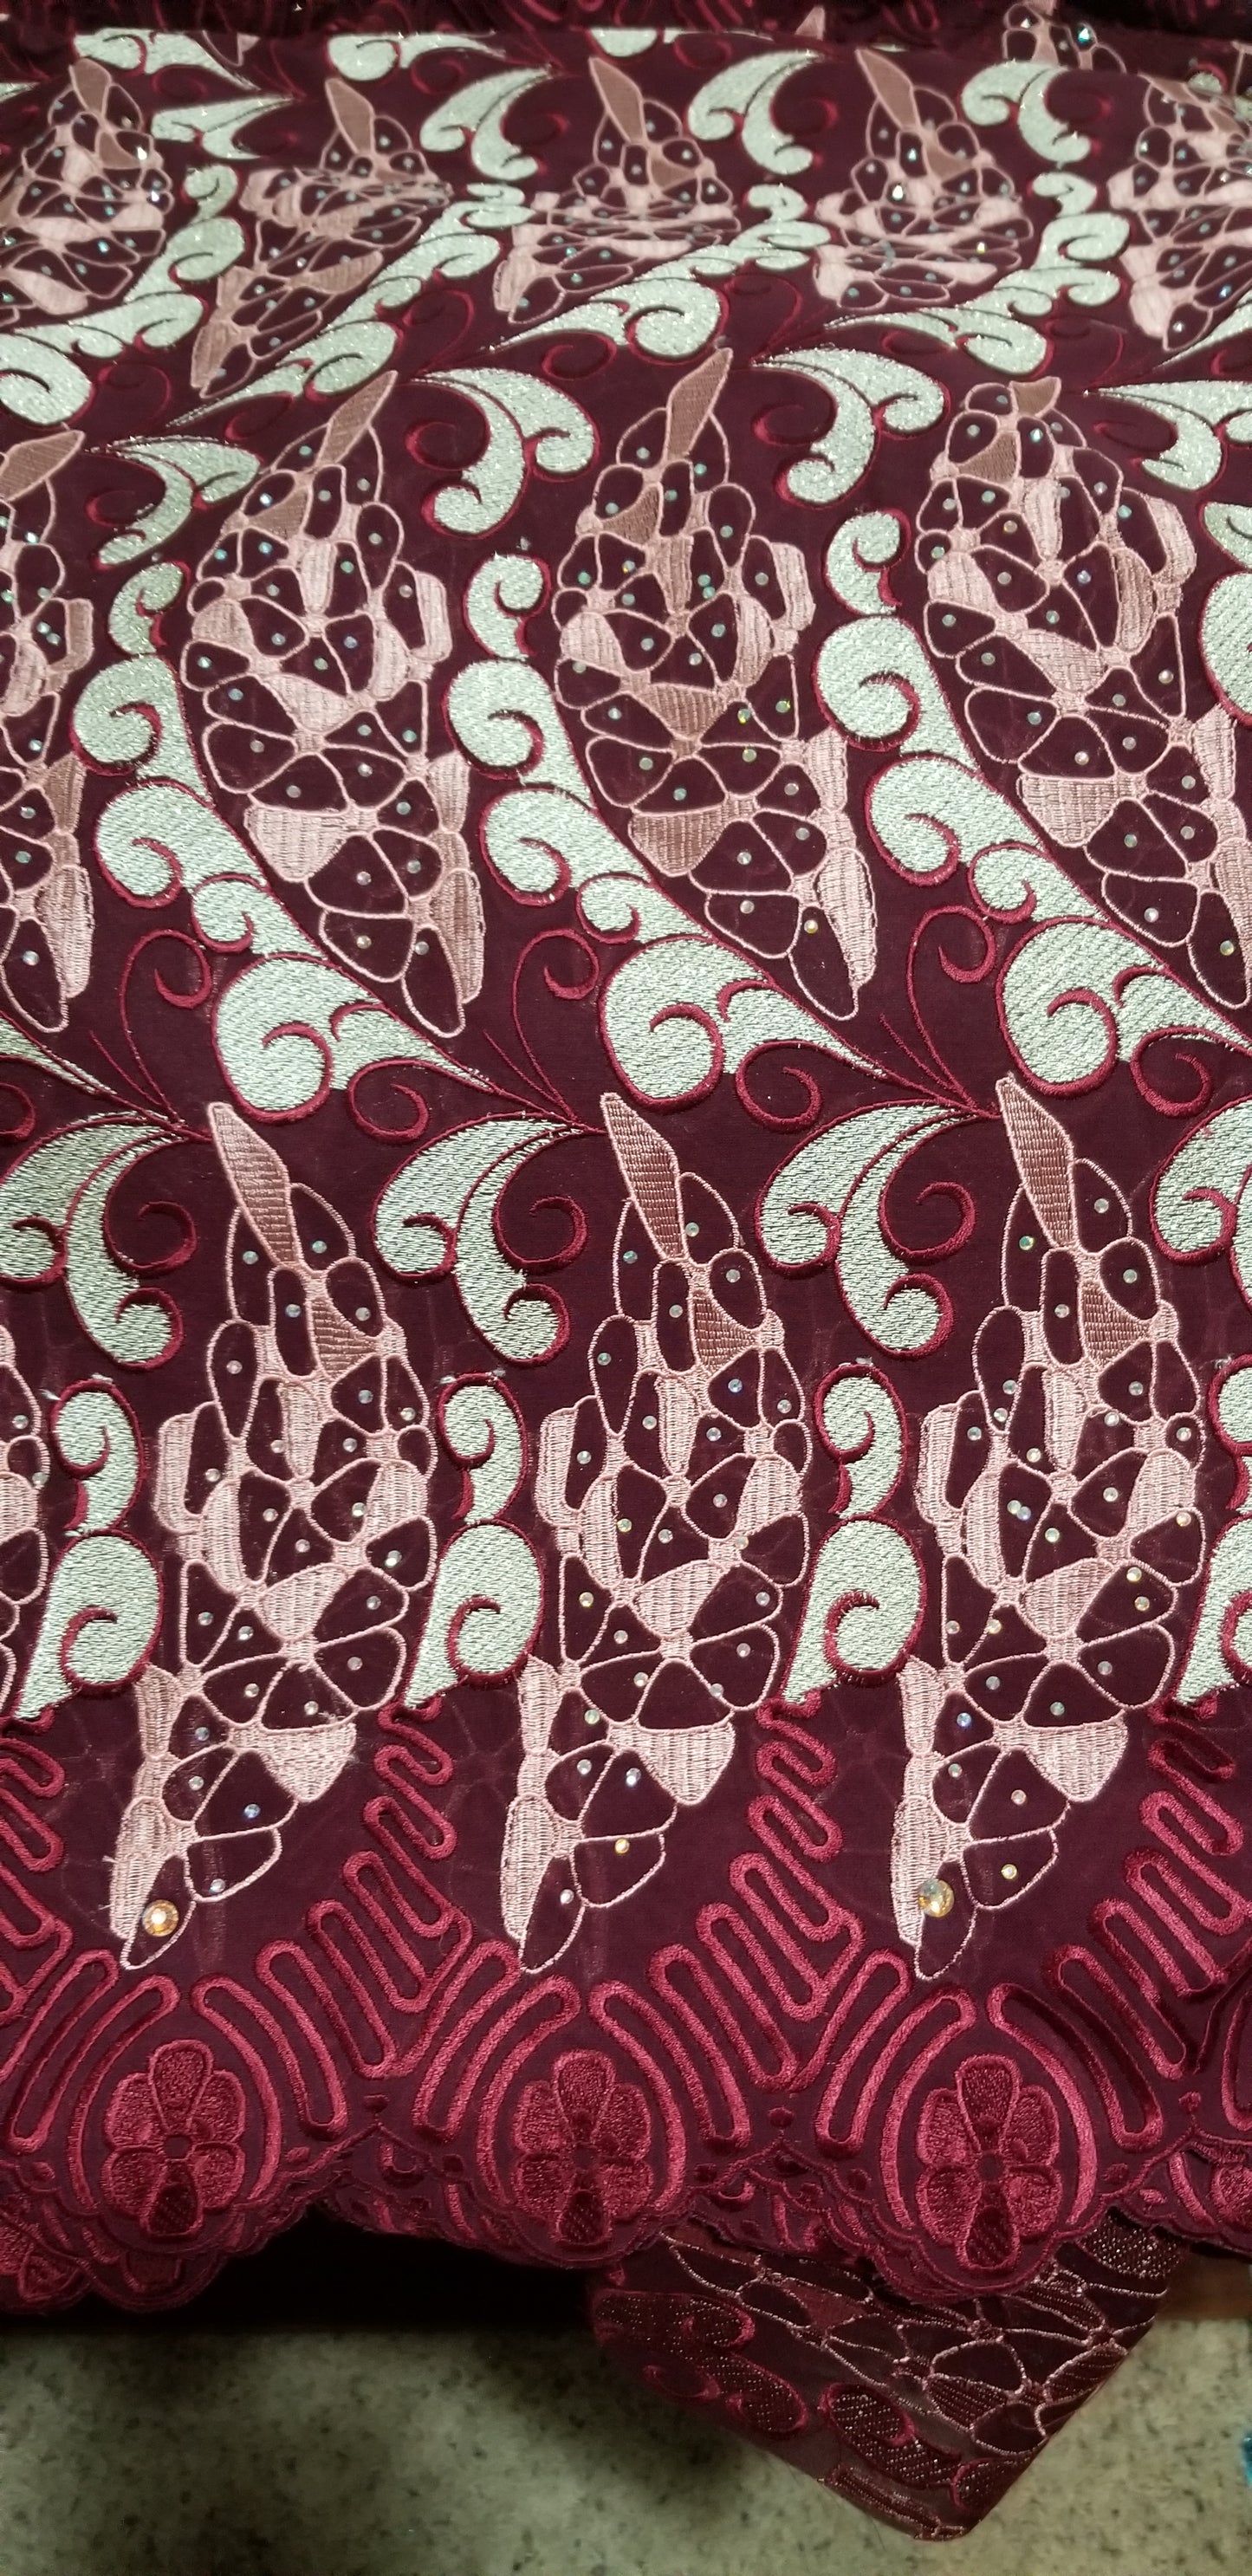 Maroon Swiss lace Fabric. Quality embroidery, all over crystal stones. Sold per 5 yards, peice is for 5yds. Nigerian celebrants Swiss lace at a discount price